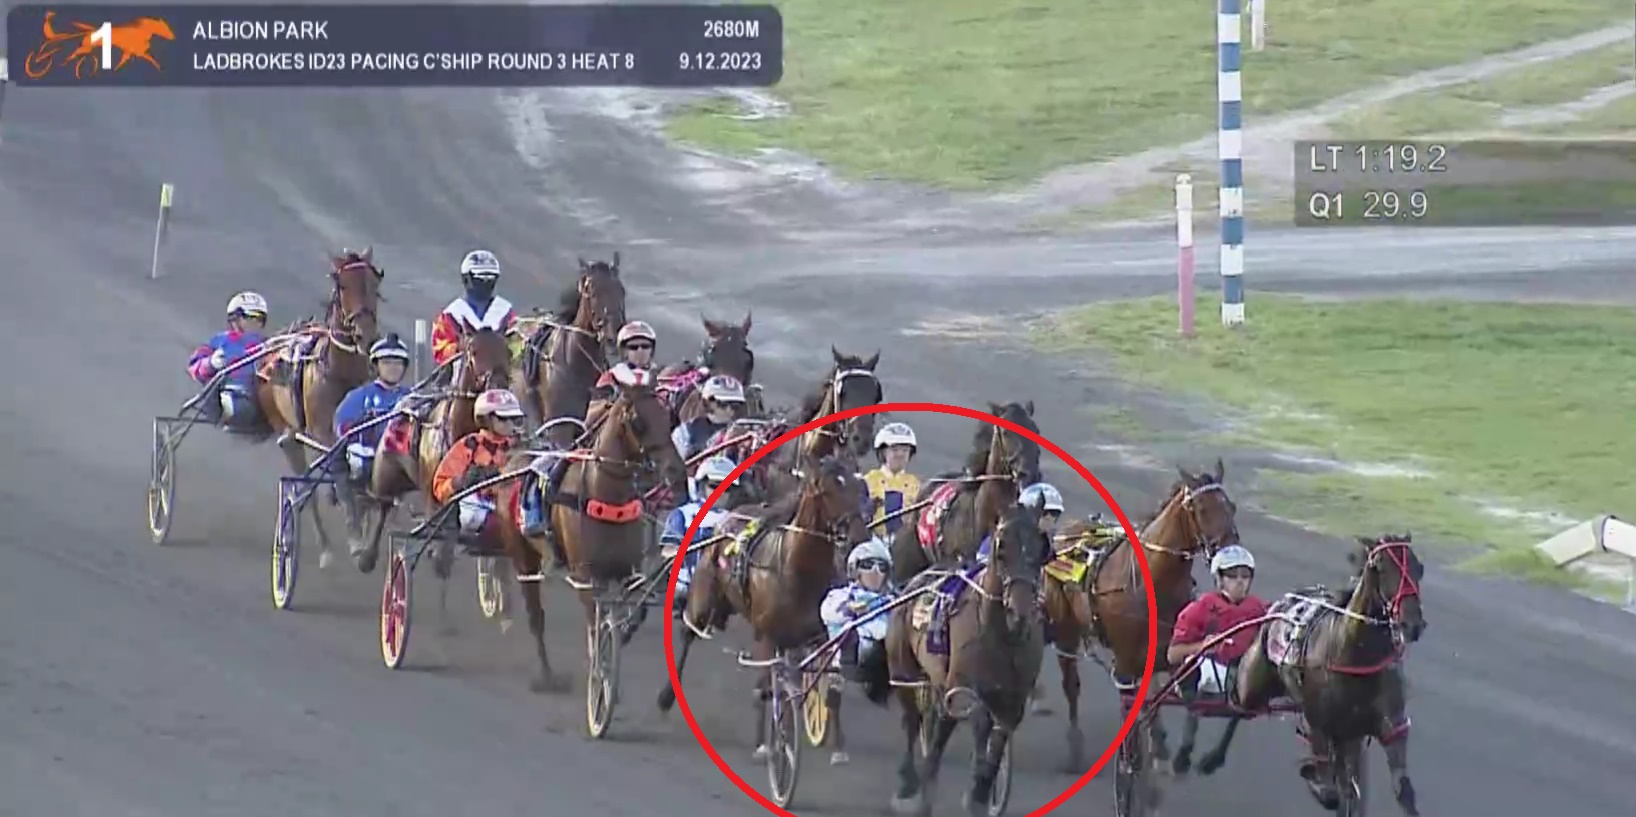 Why Did All These Turpin/McMullen Horses Pull So Hard in the Heats – What the Hell Was Going On?